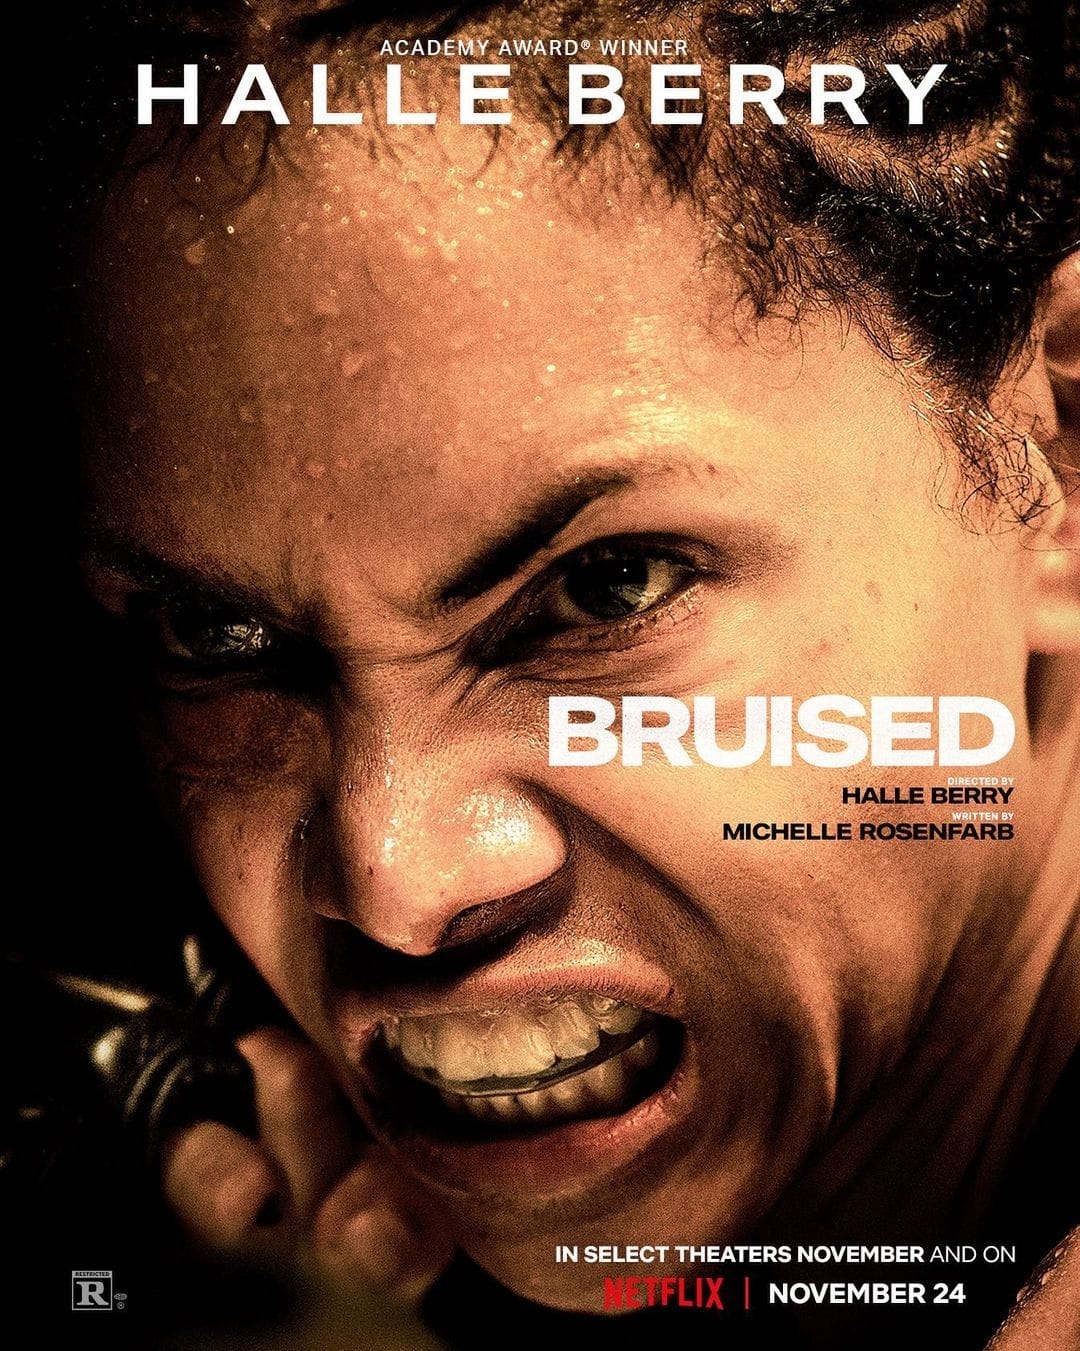 Oscar-winning former Bond girl Halle Berry makes her directorial debut with the 2020 sports drama film Bruised